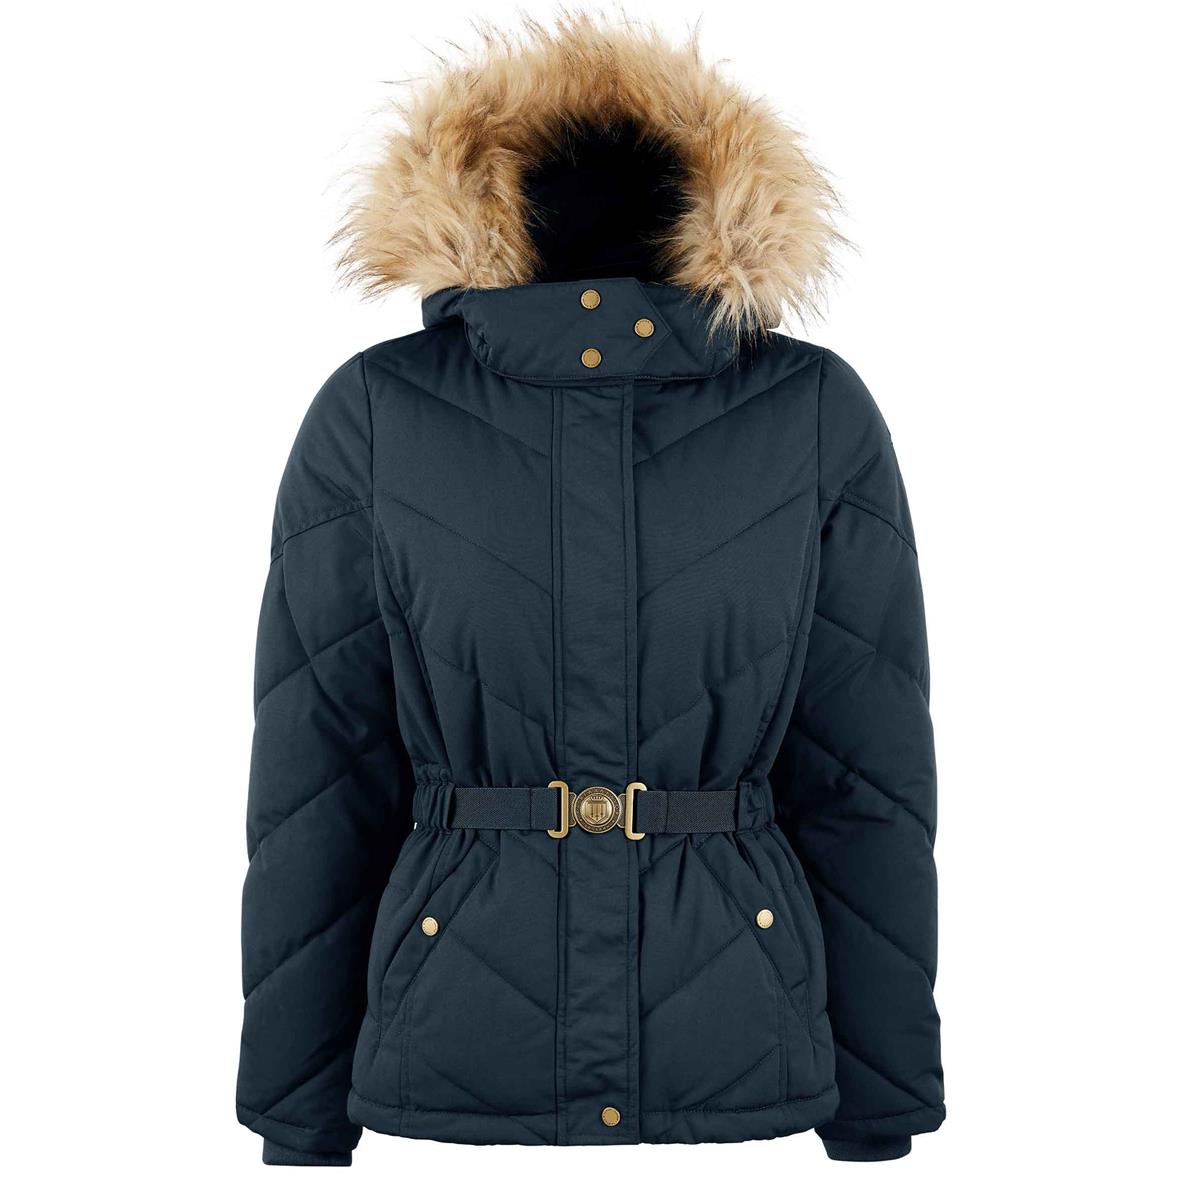 Fairfax & Favor Womens Charlotte Padded Jacket Questions & Answers